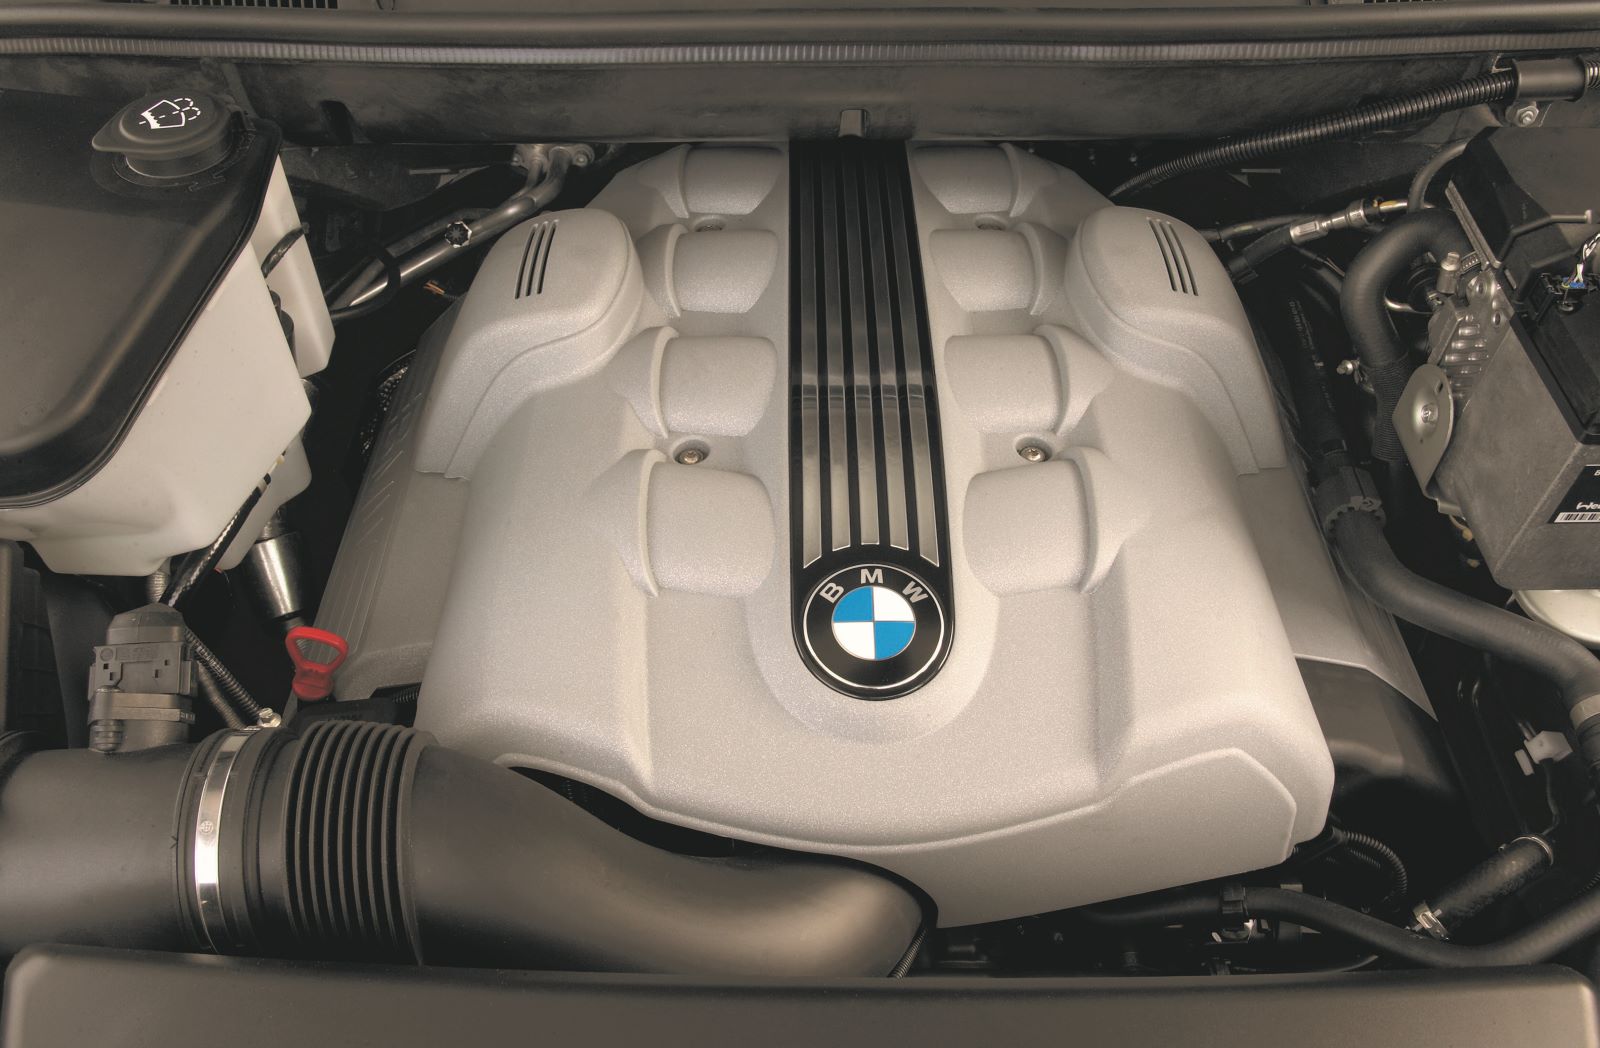 BMW's 4.8 litre V8 used in the X5